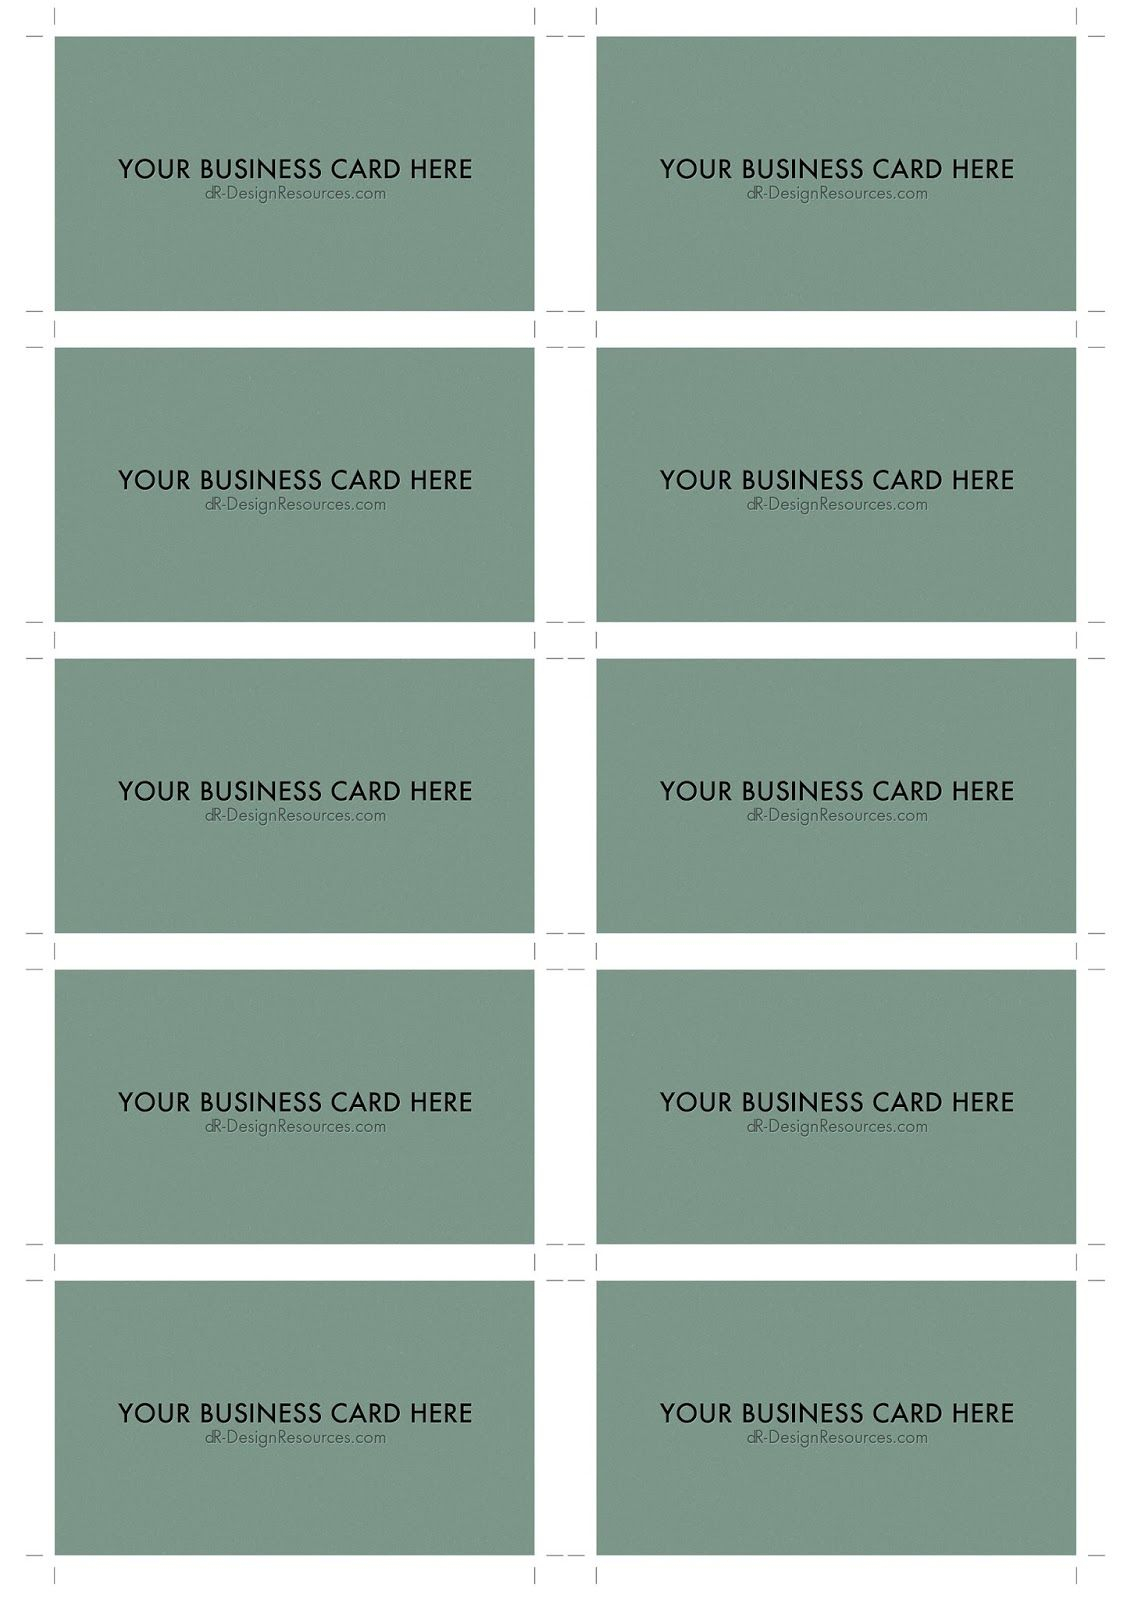 A4 Business Card Template Psd (10 Per Sheet) | Business Pertaining To Business Card Size Photoshop Template